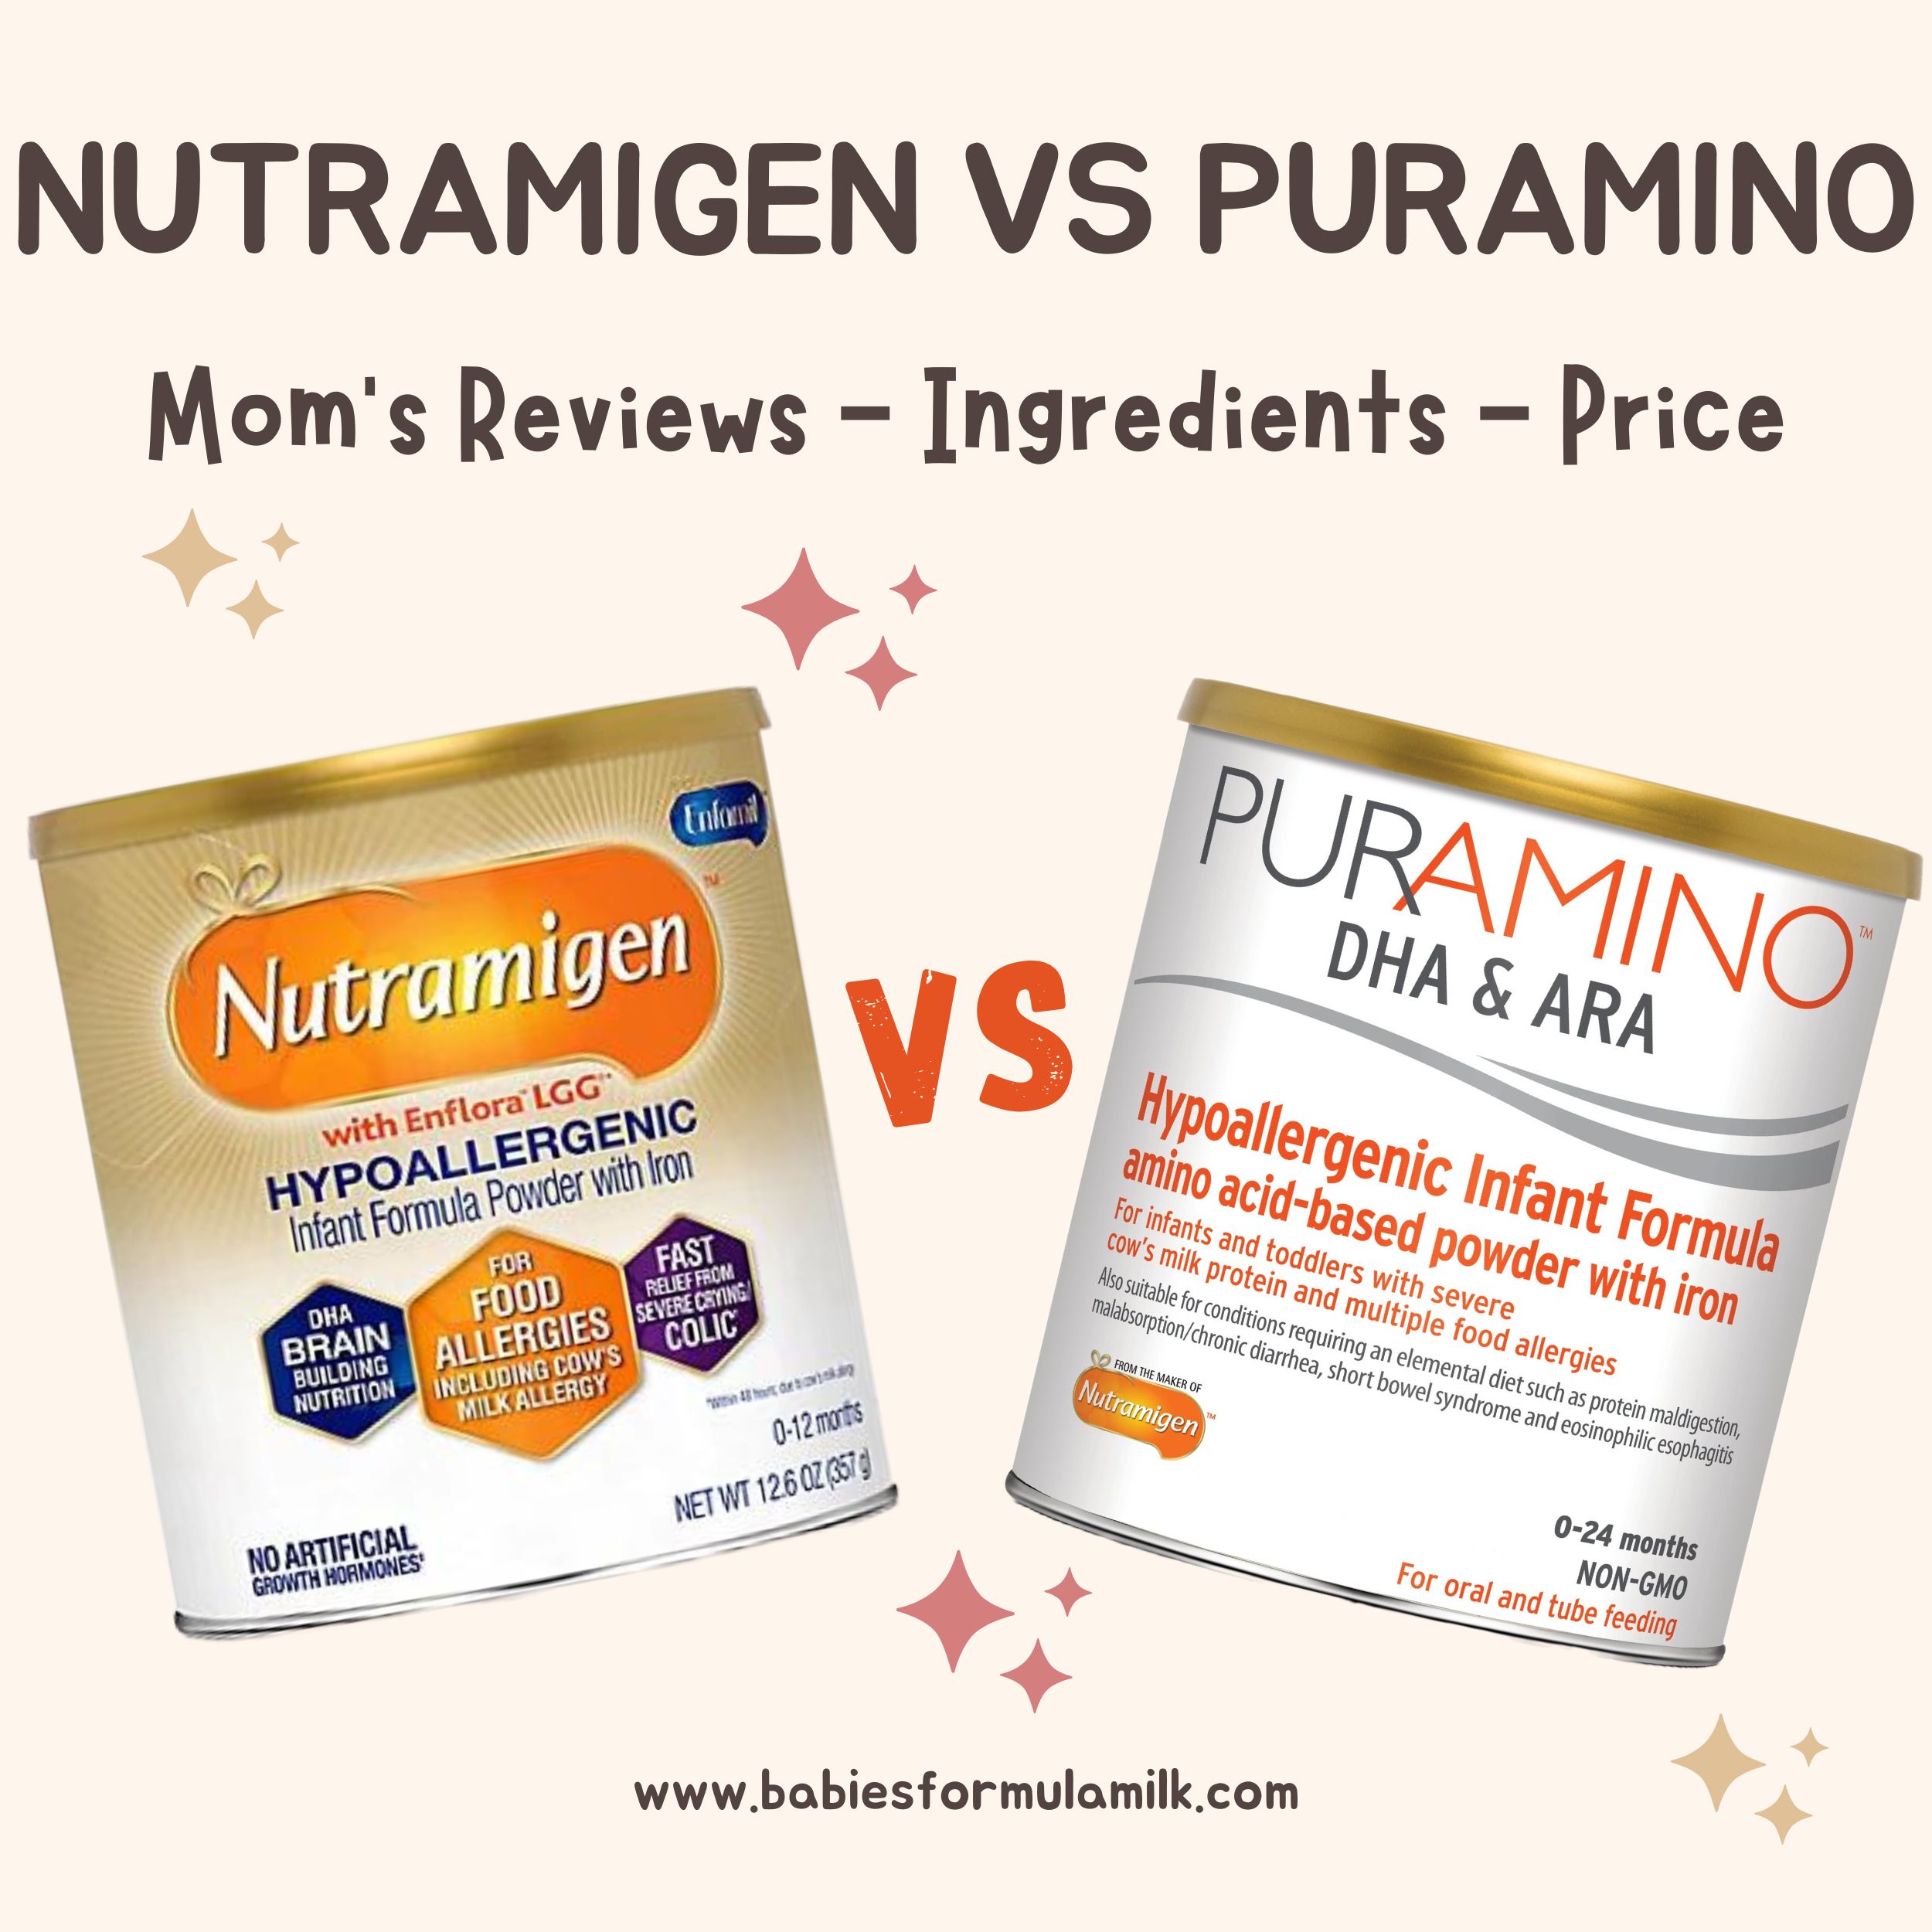 You are currently viewing Nutramigen Vs Puramino: Mom’s Reviews, Ingredients, and Price